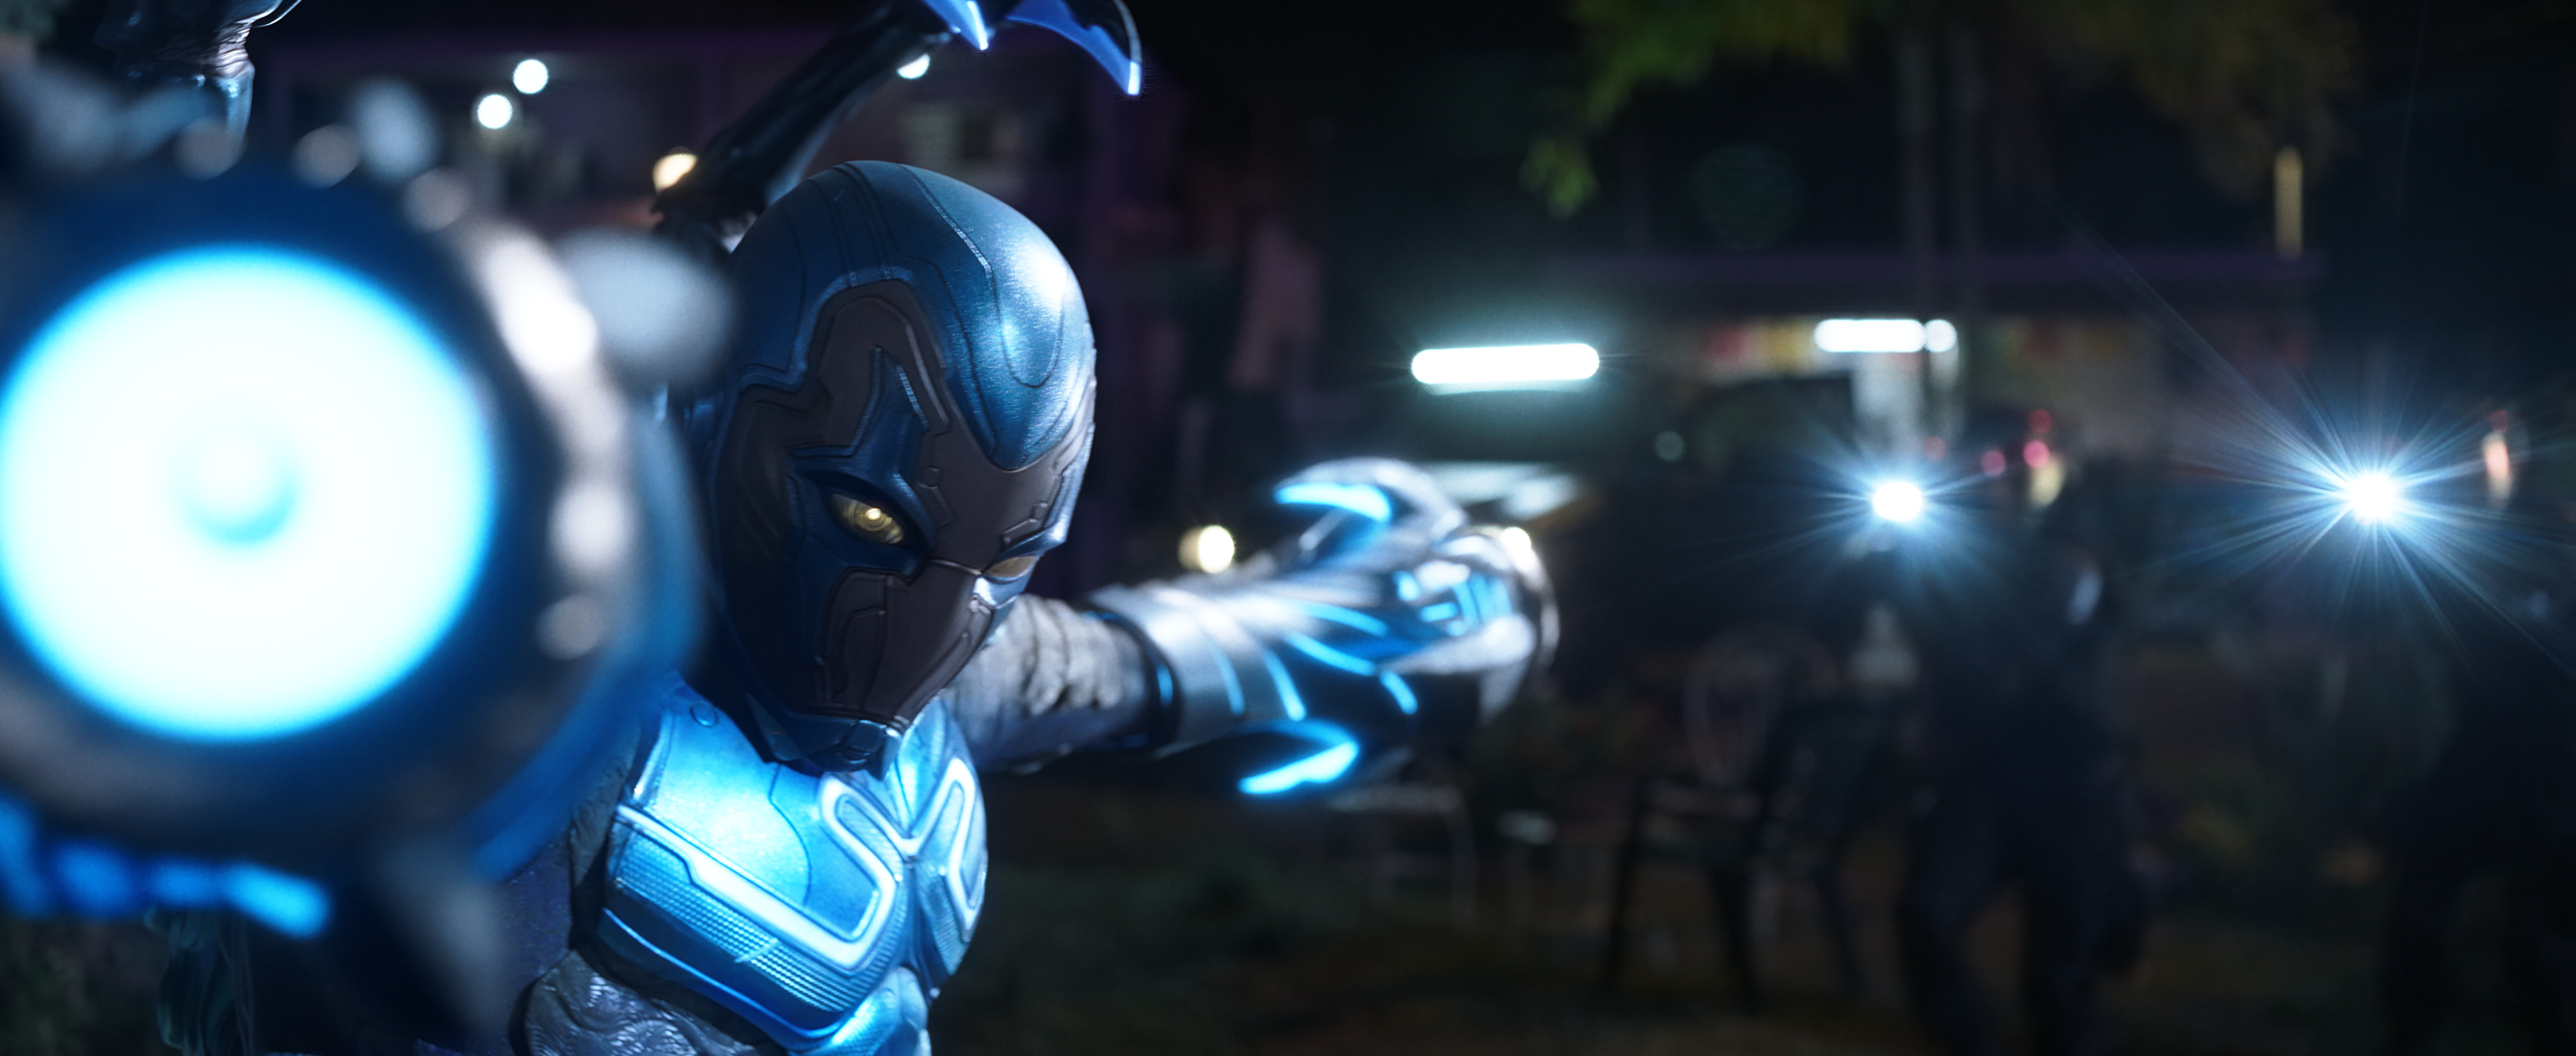 Blue Beetle poses with his arms in the shape of laser canons pointing both directly at and away from the camera in the film Blue Beetle.